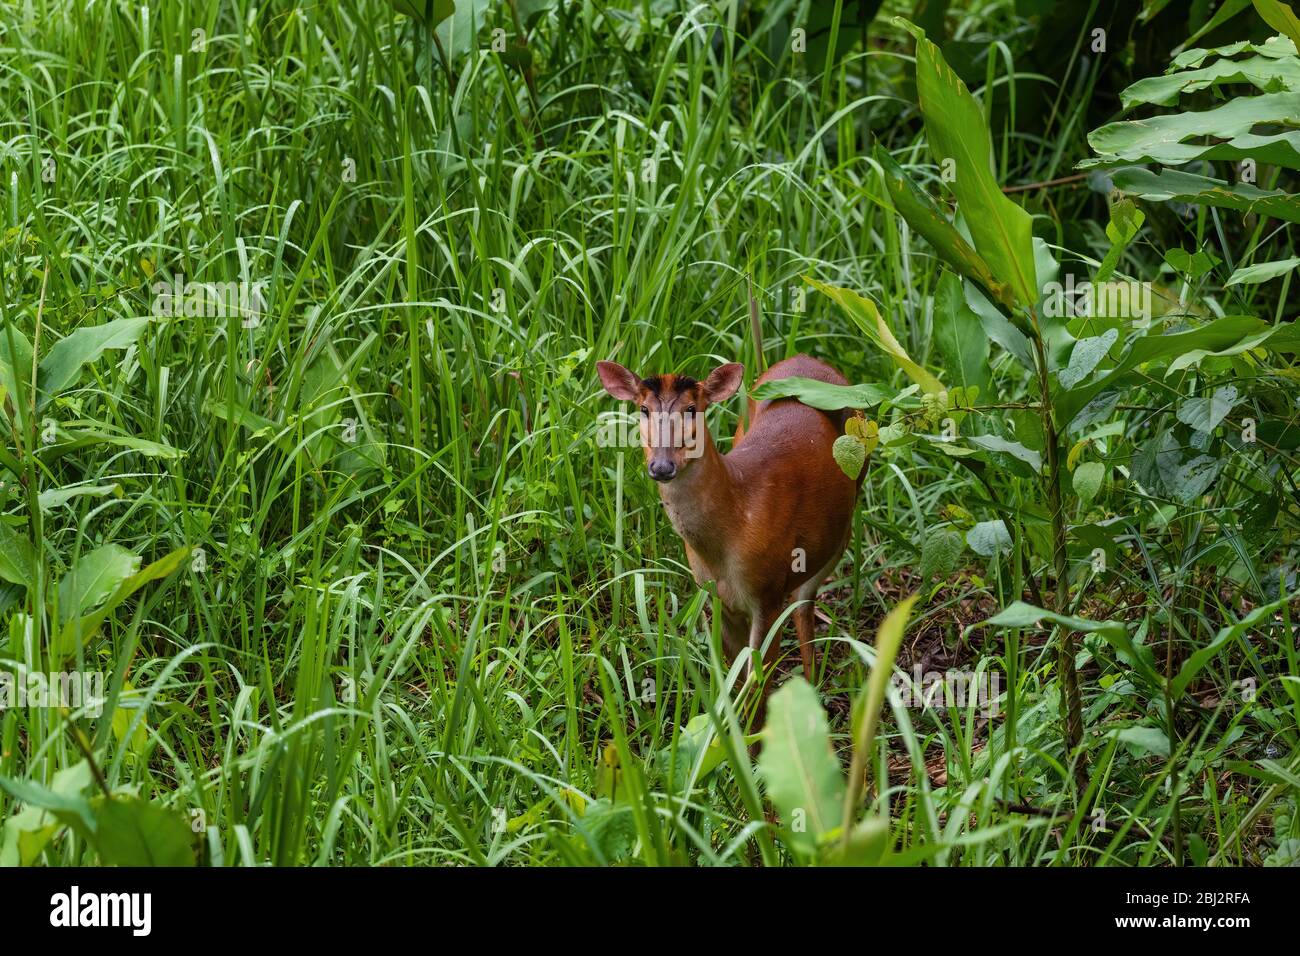 Southern Red Muntjac - Muntiacus muntjak, beatiful small forest deer from Southeast Asian forests and woodlands, Mutiara Taman Negara, Malaysia. Stock Photo